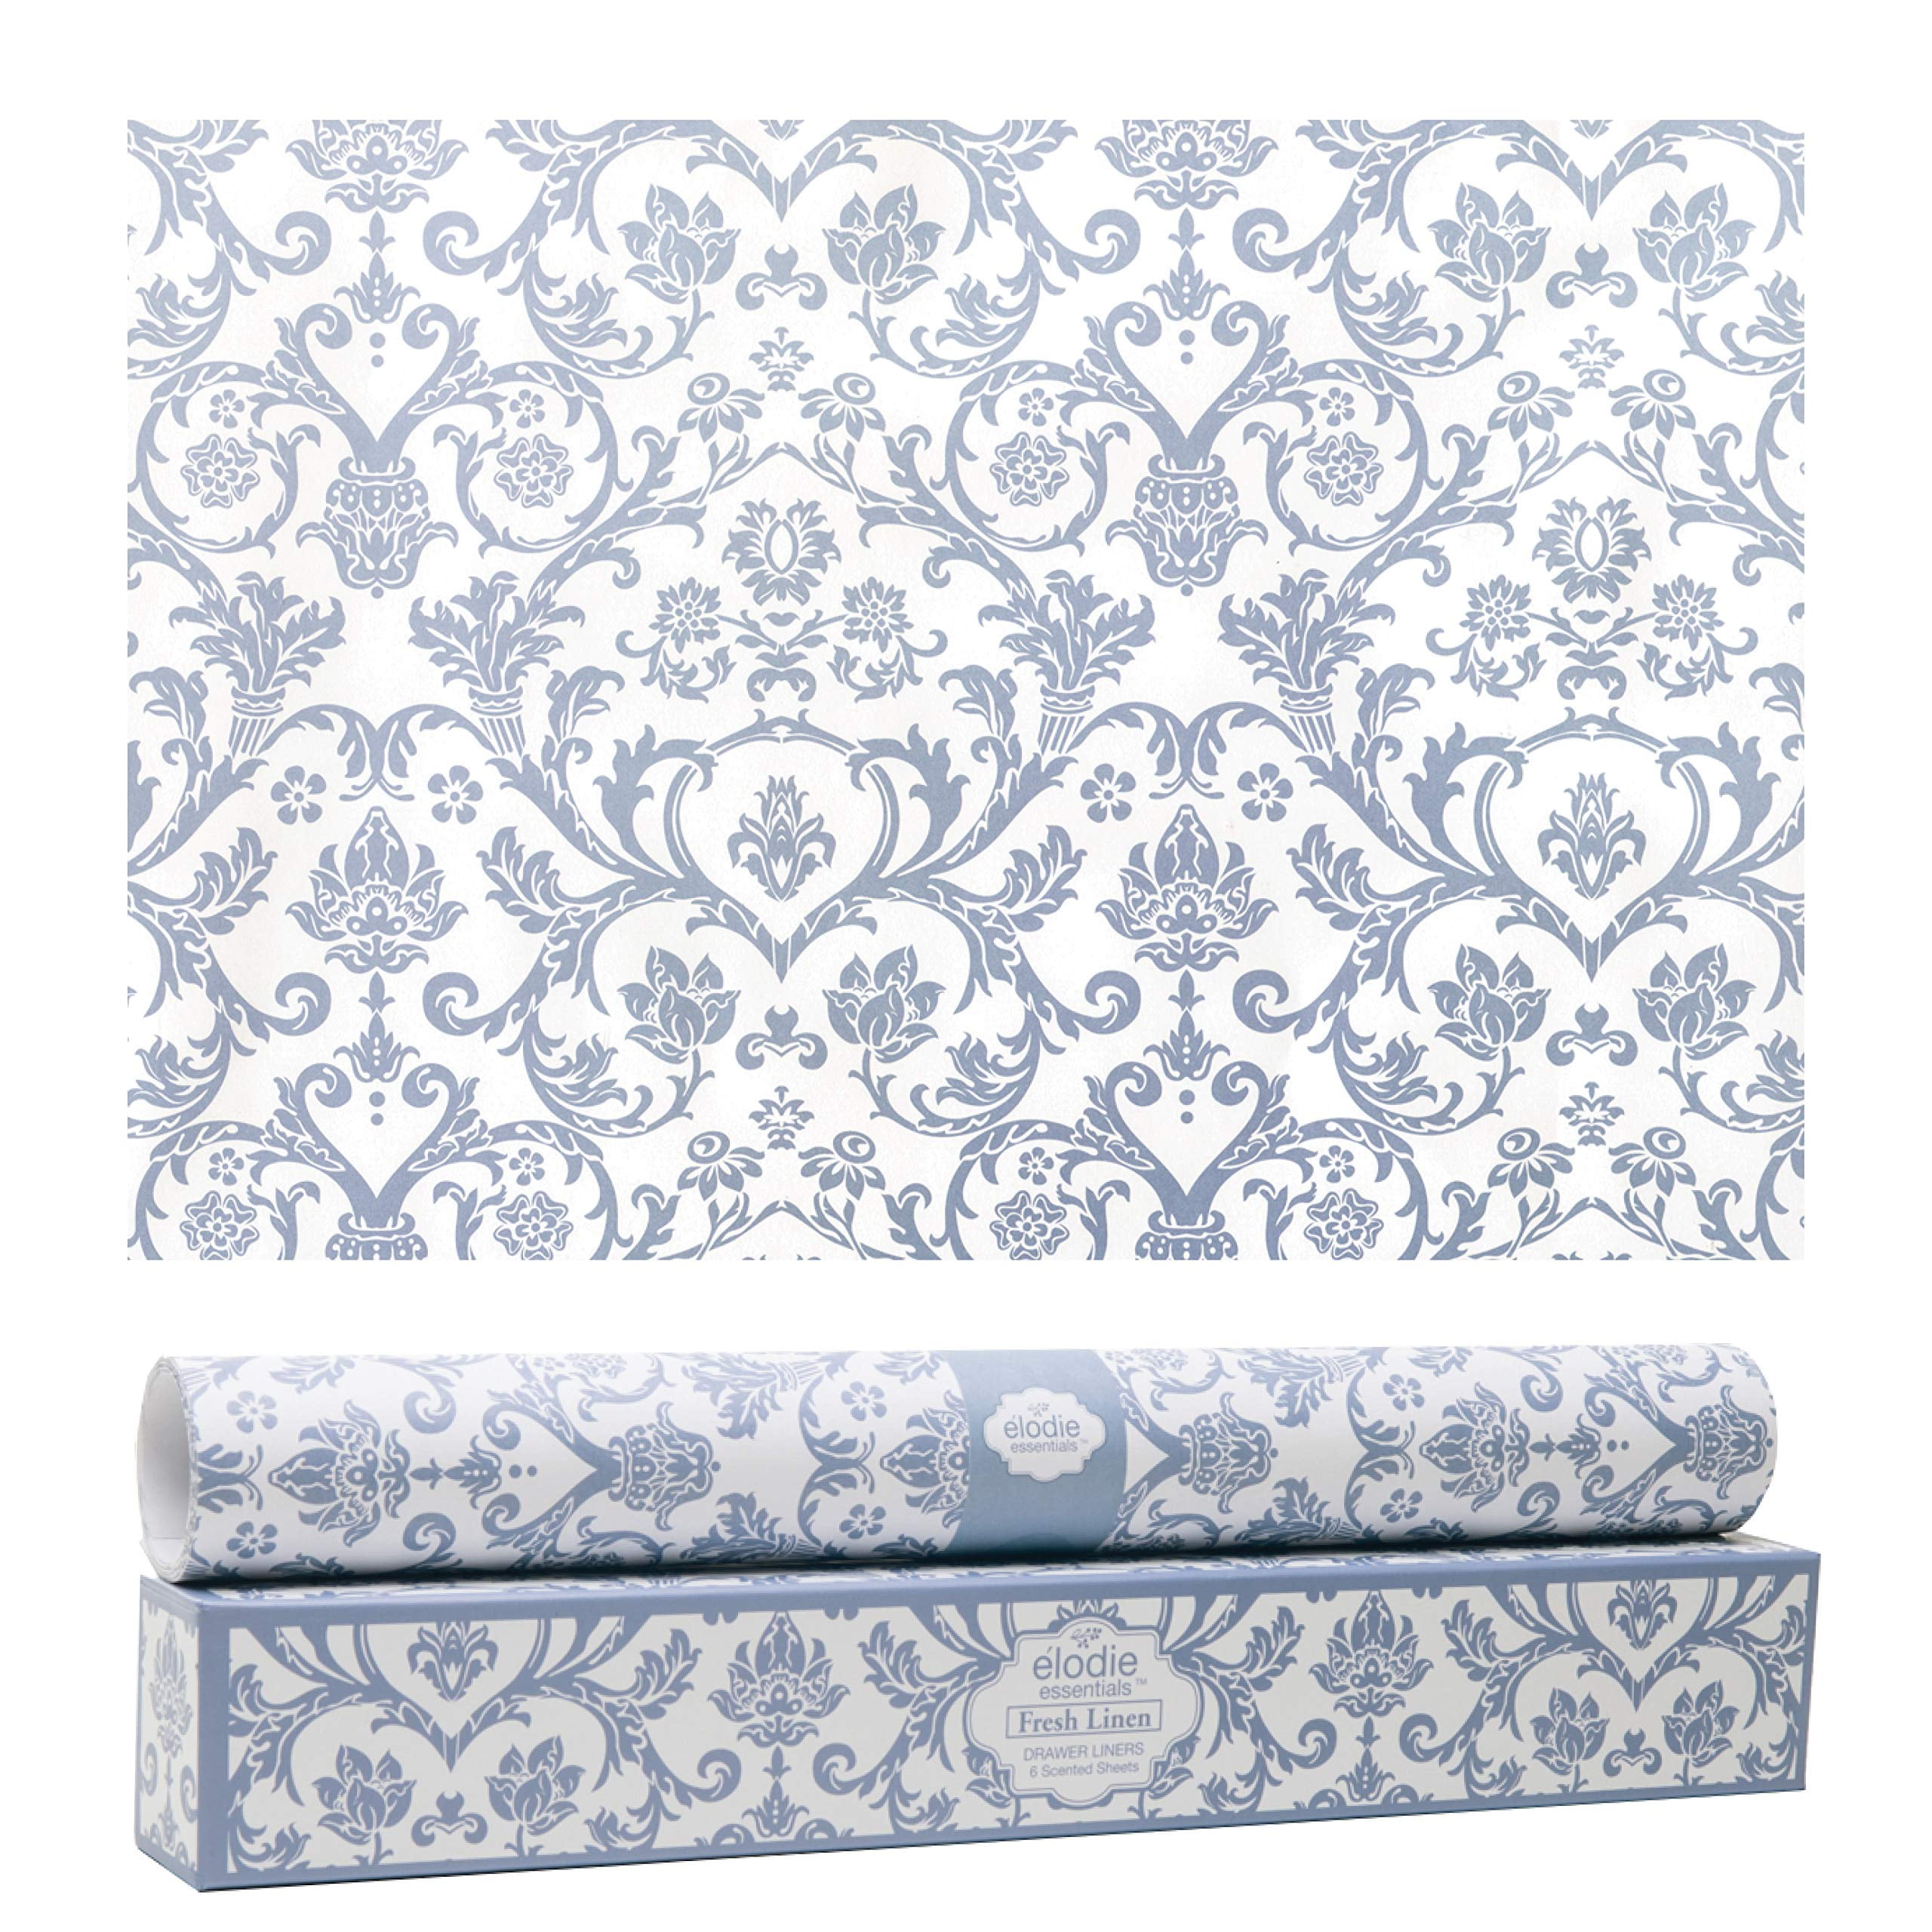 Elodie Essentials Scented Drawer Liners Royal Damask Fresh Linen